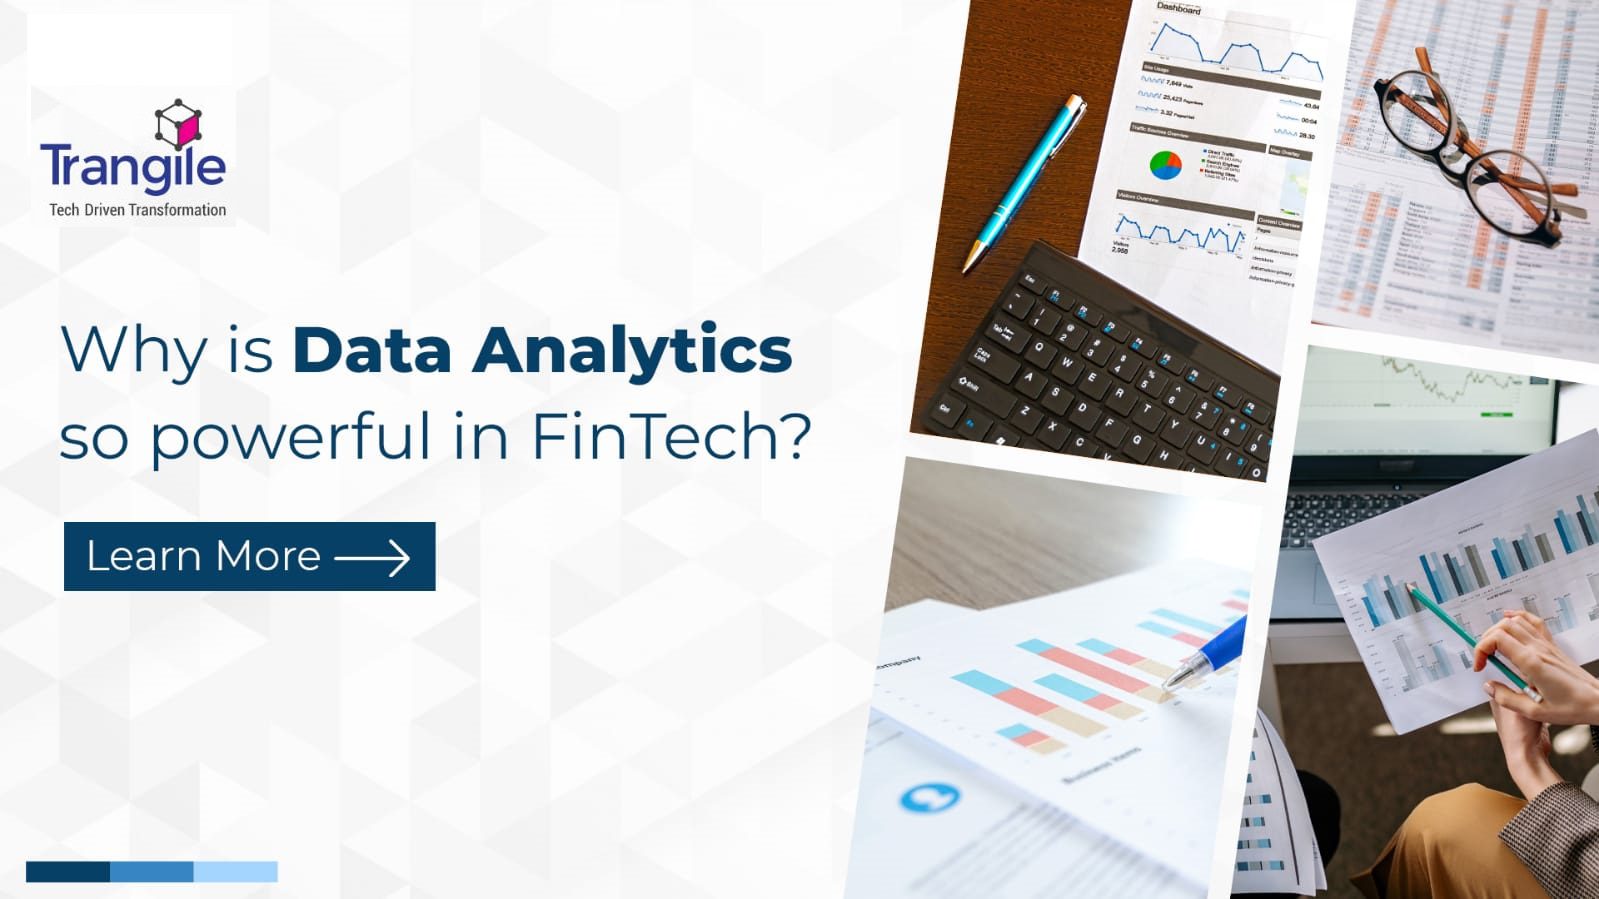 Why is data analytics so powerful in FinTech?